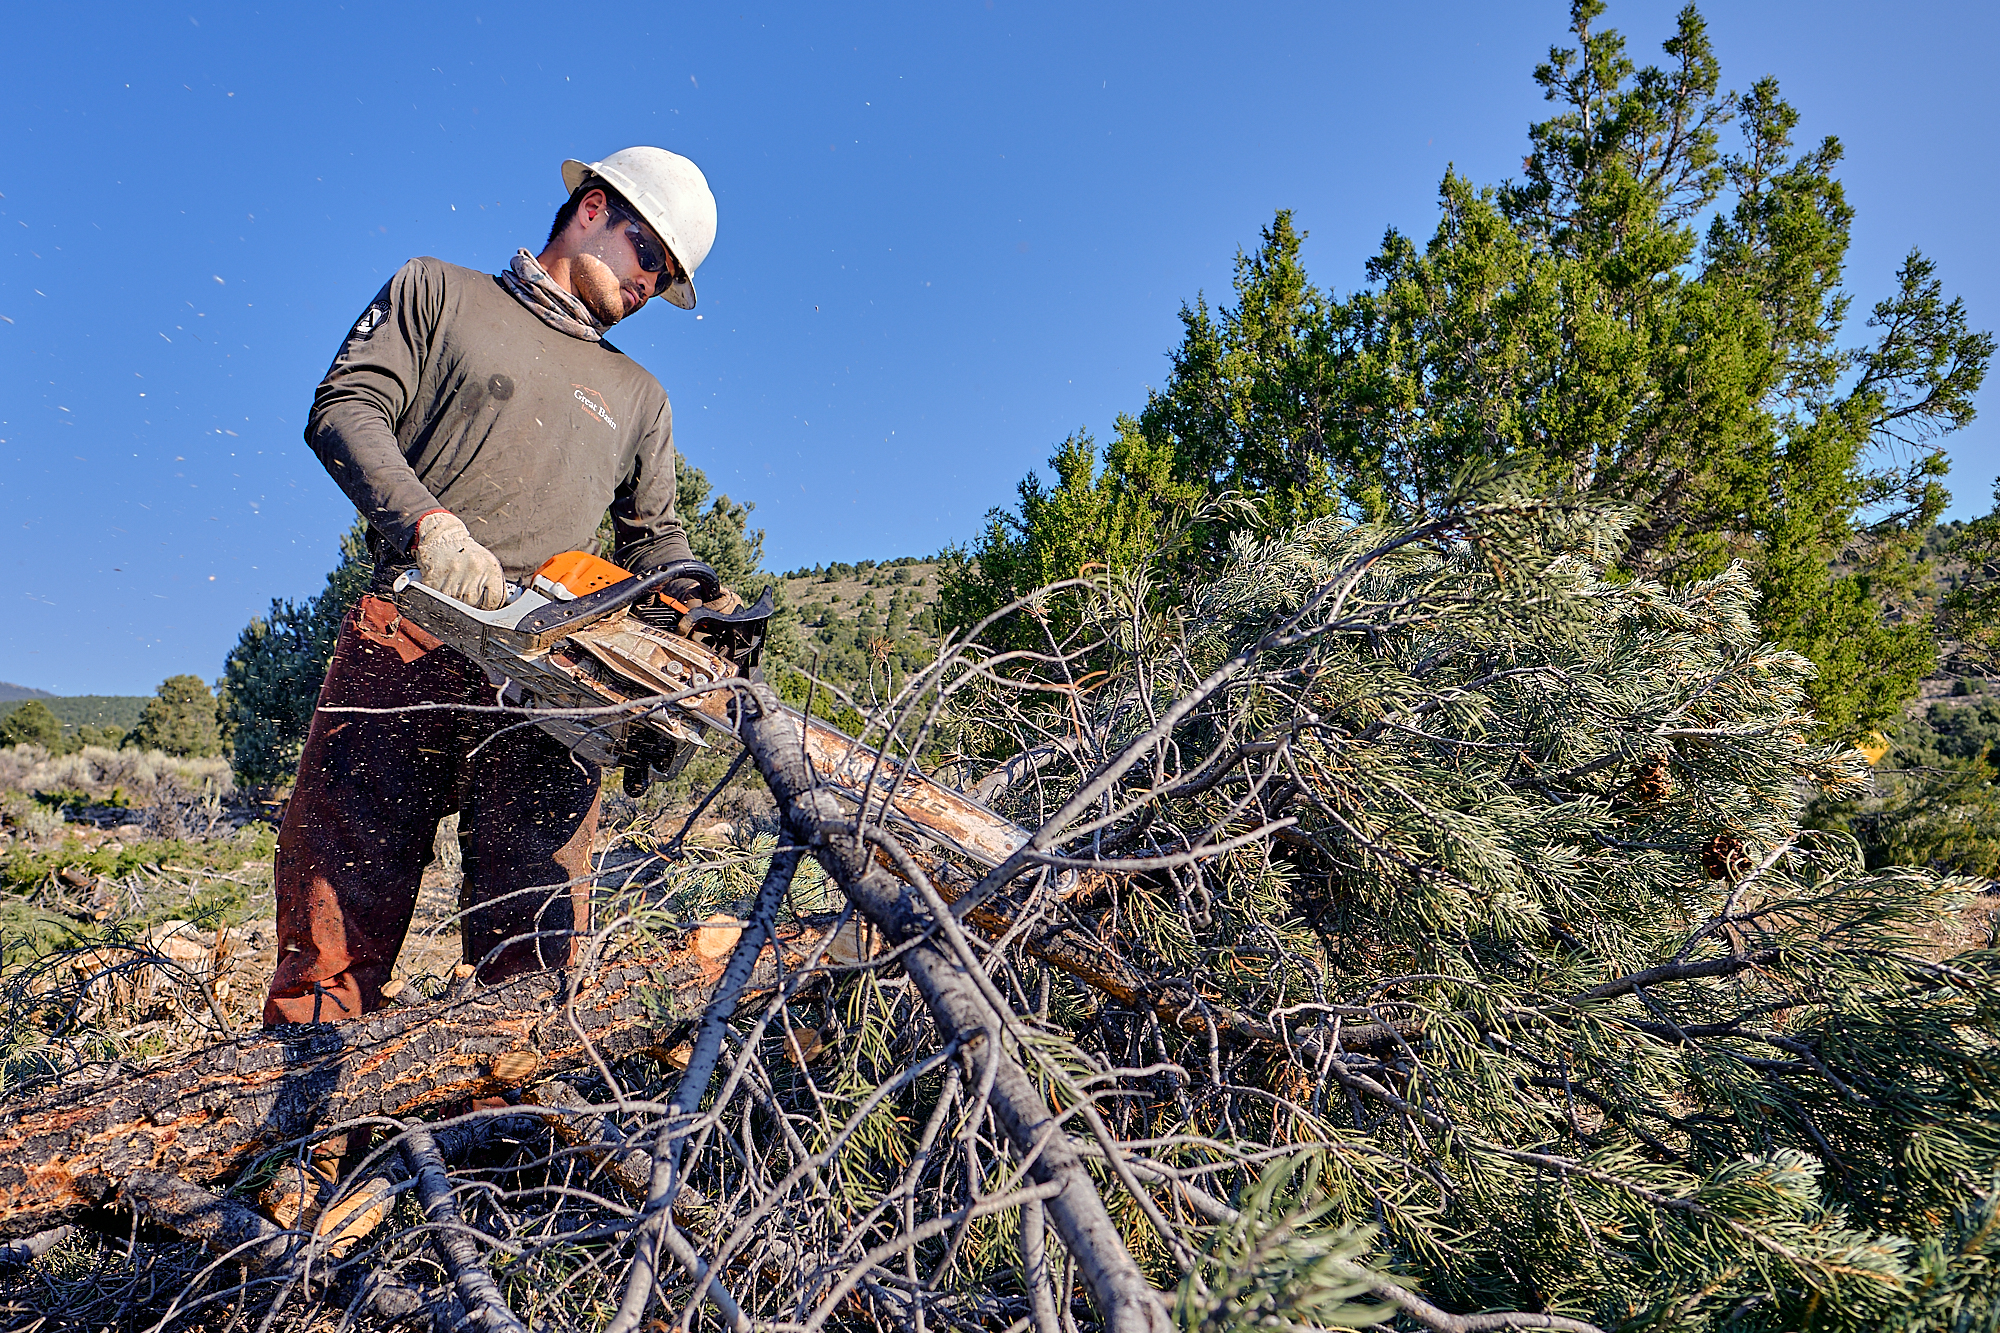  Alex cleans up a recently felled tree. | Great Basin National Park, NV 8/8/18 